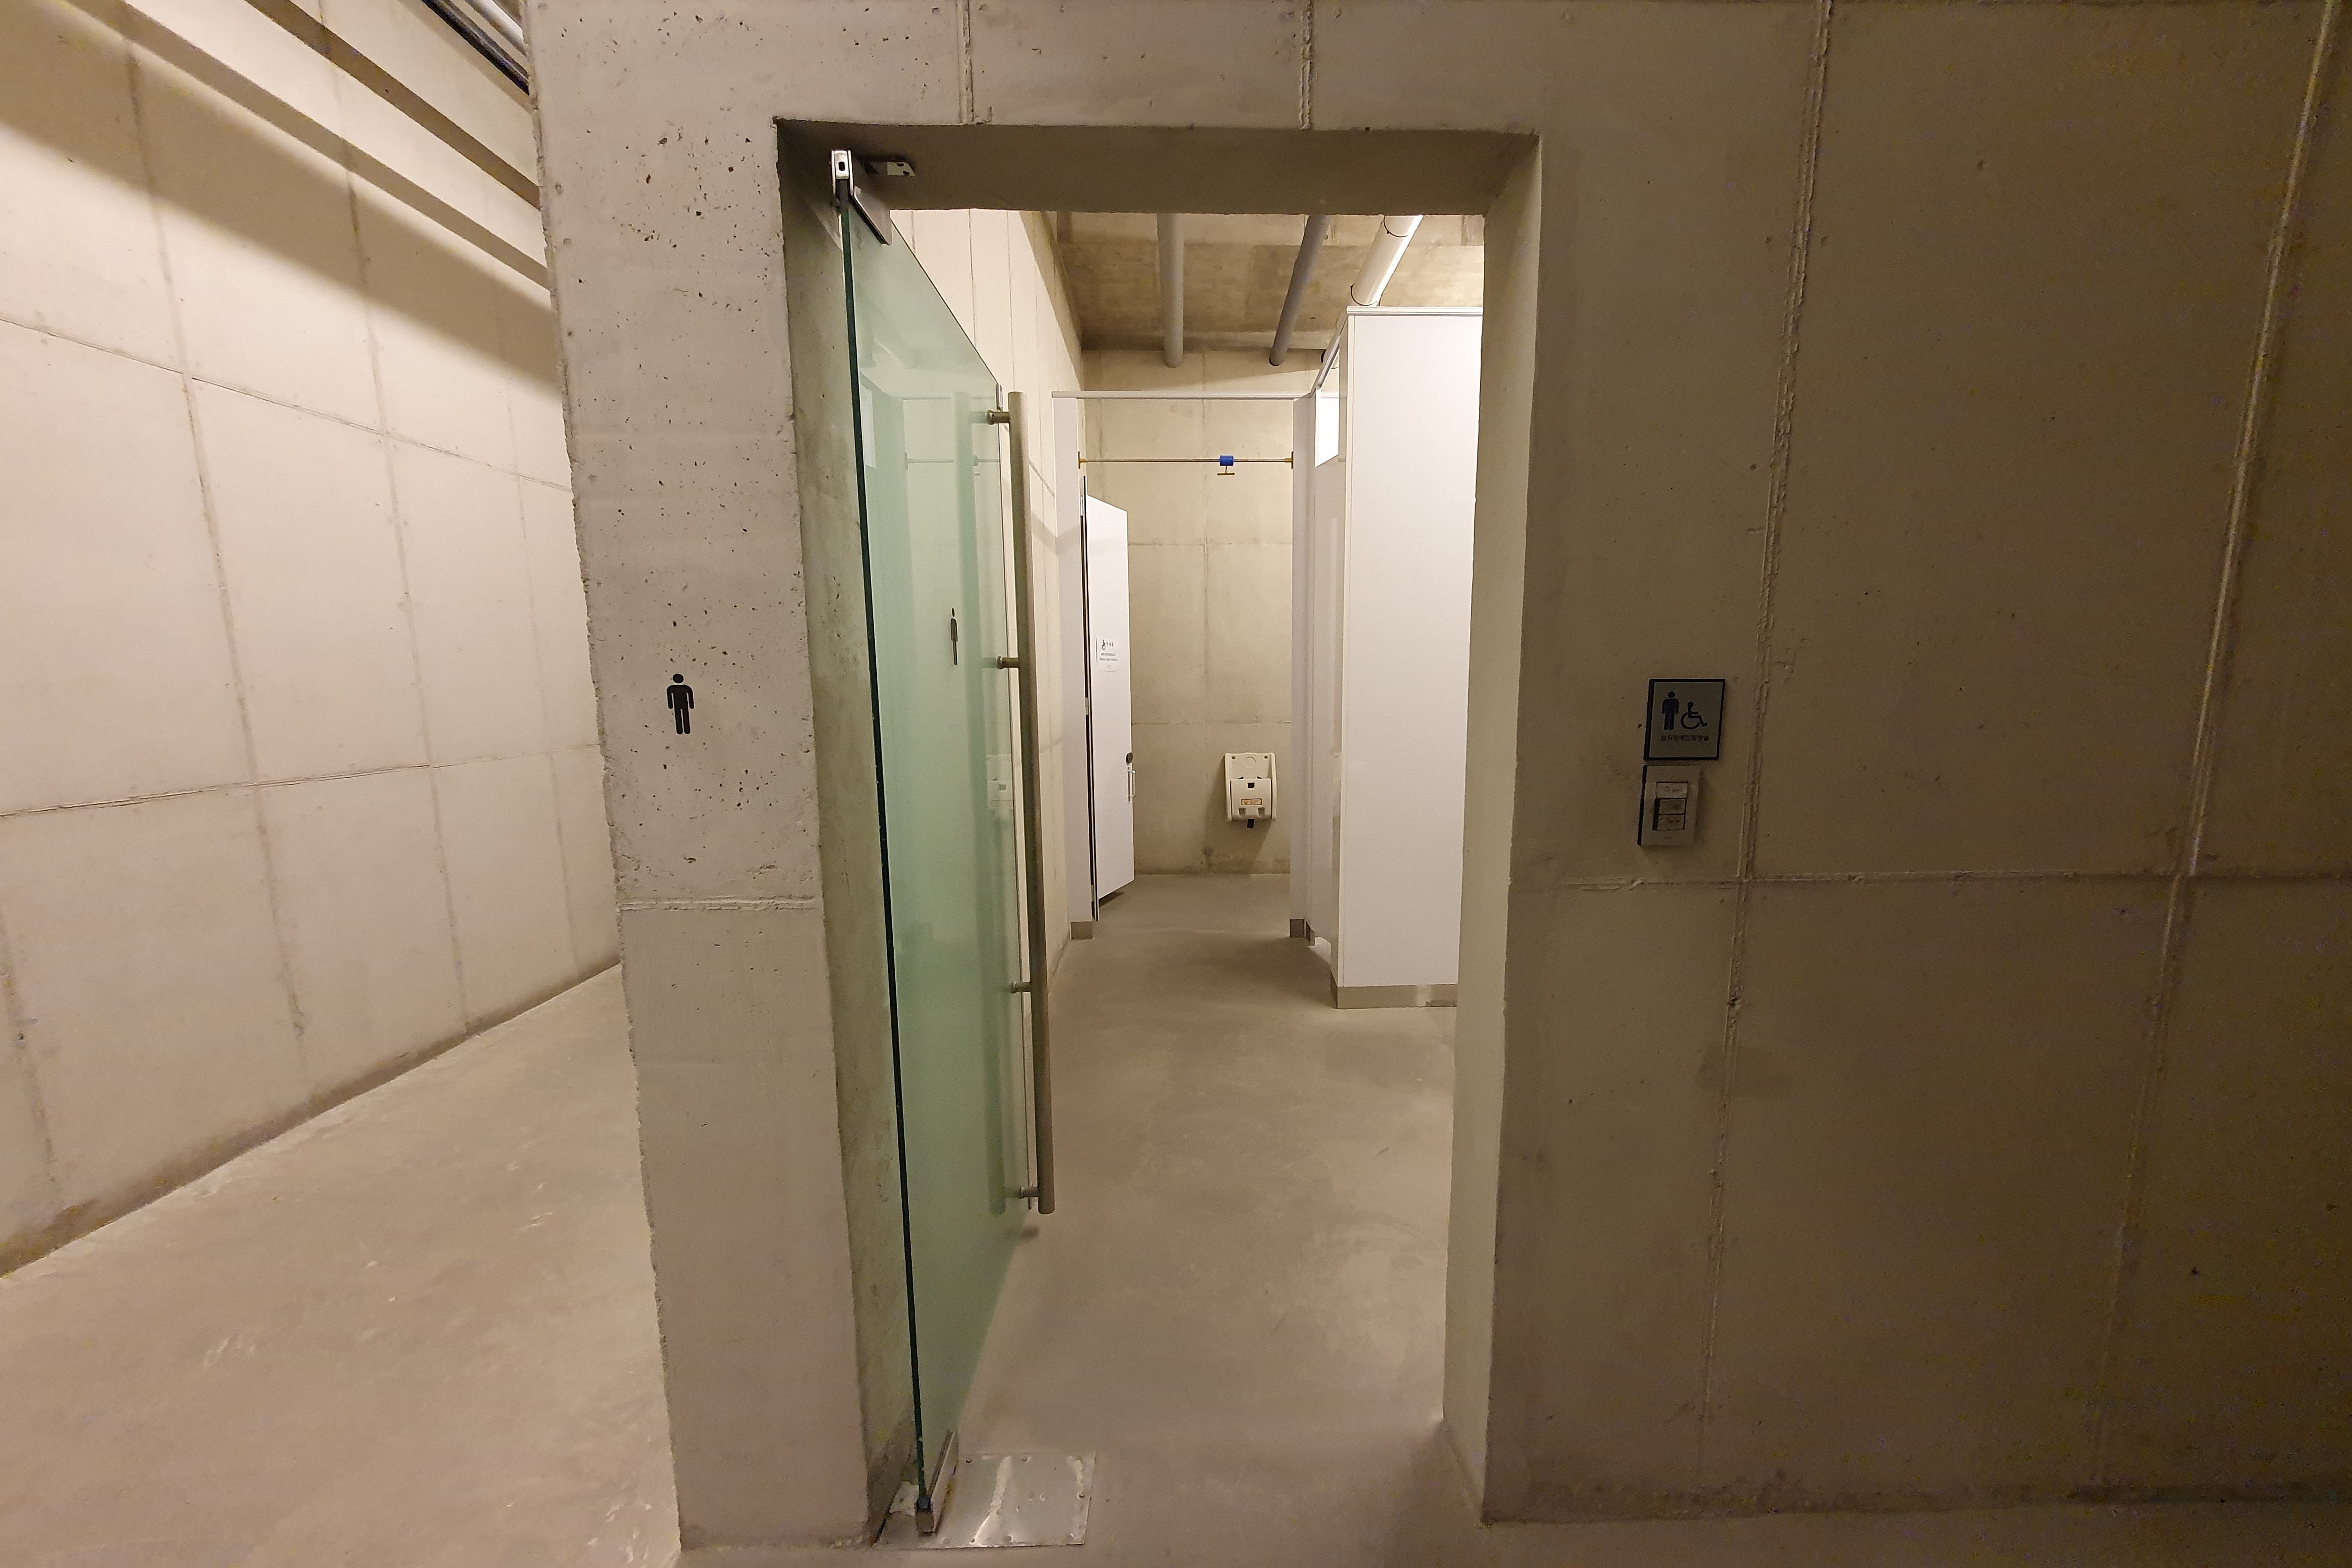 Accessible Restrooms0 : The restroom entrance with manual hinged door open